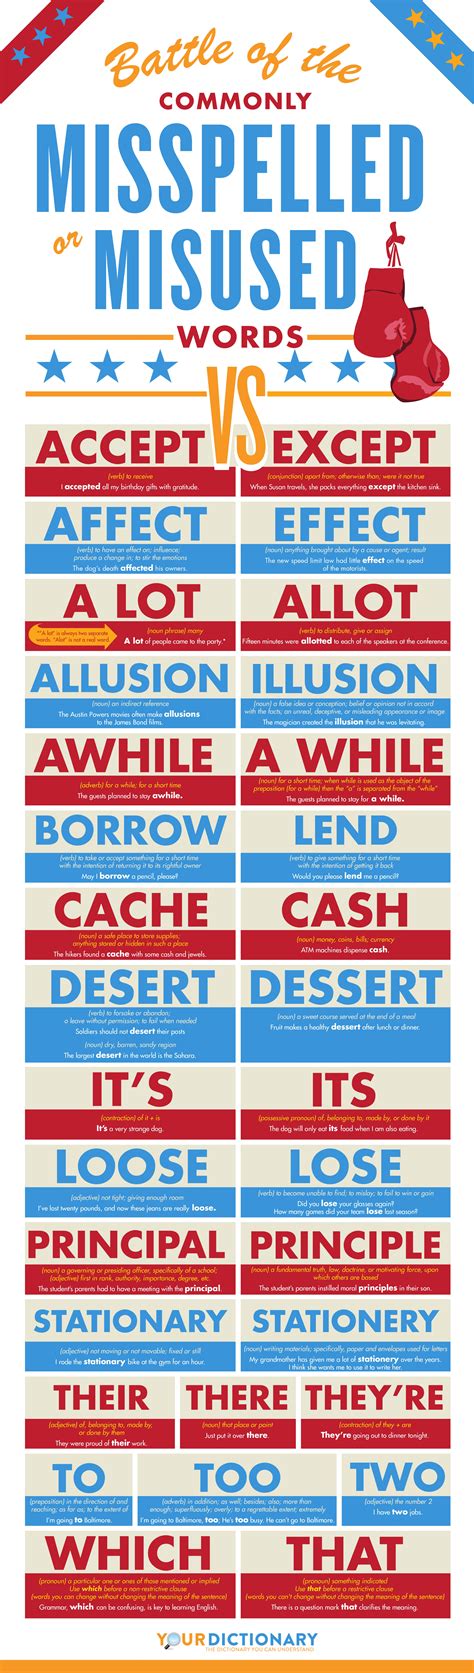 Beware Of These Commonly Misused And Misspelled Words Infographic